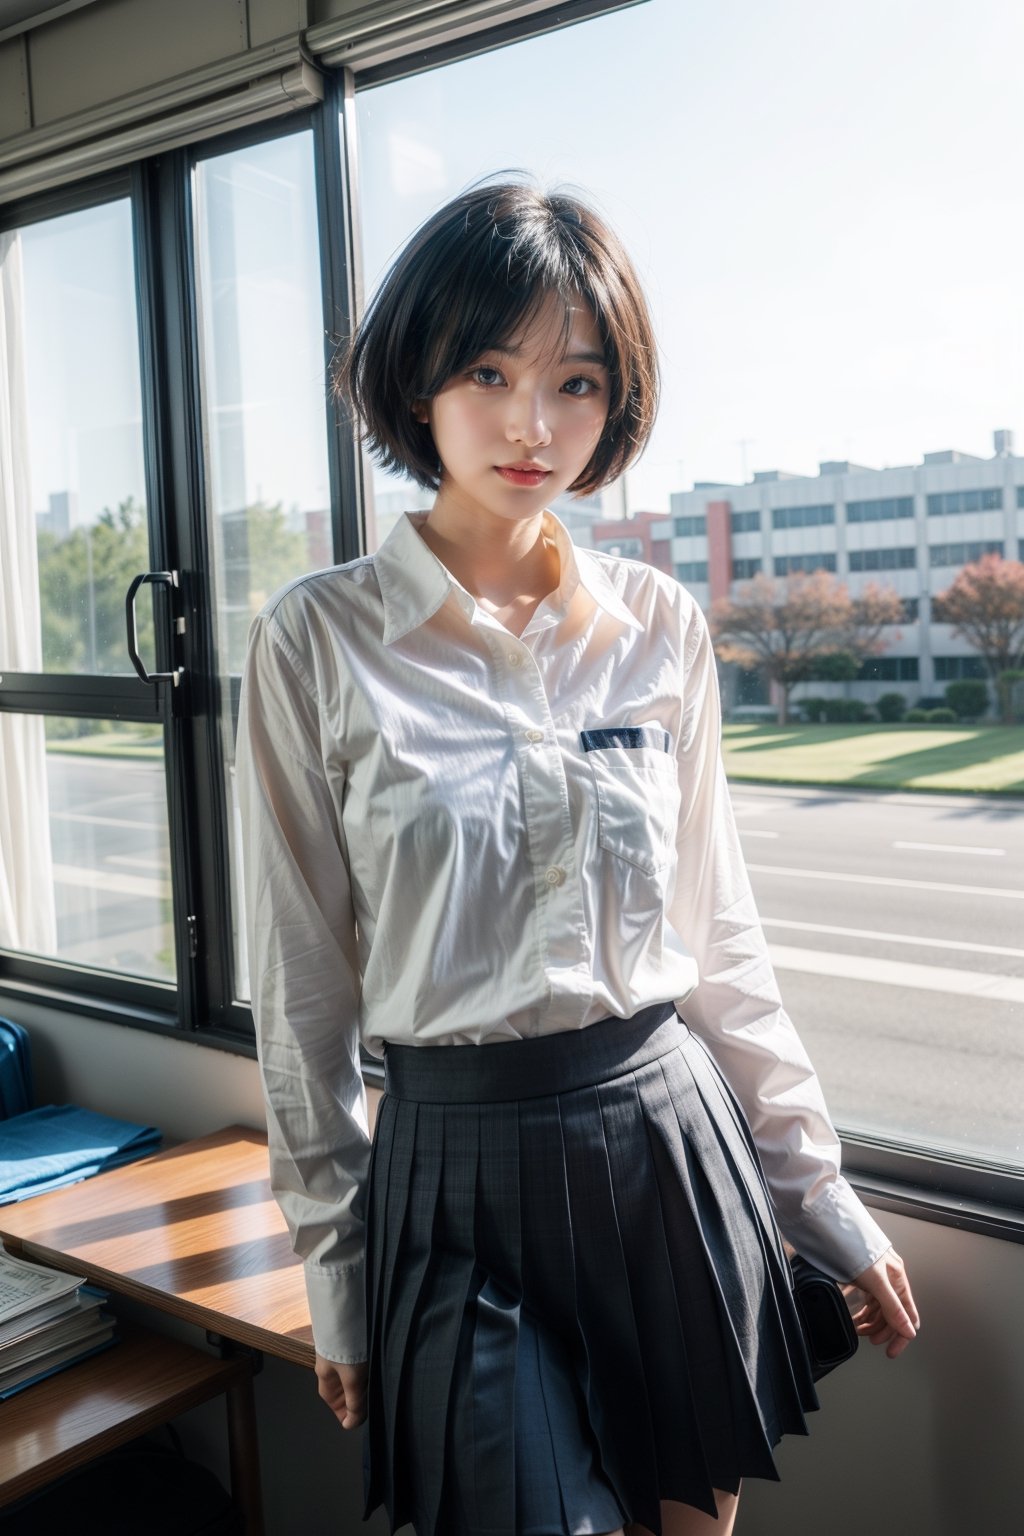 A Chinese female student in school uniform, 18 years old, with short hair and full of energy, Tyndall fiber optic light shines from the window, with the school library background in the background